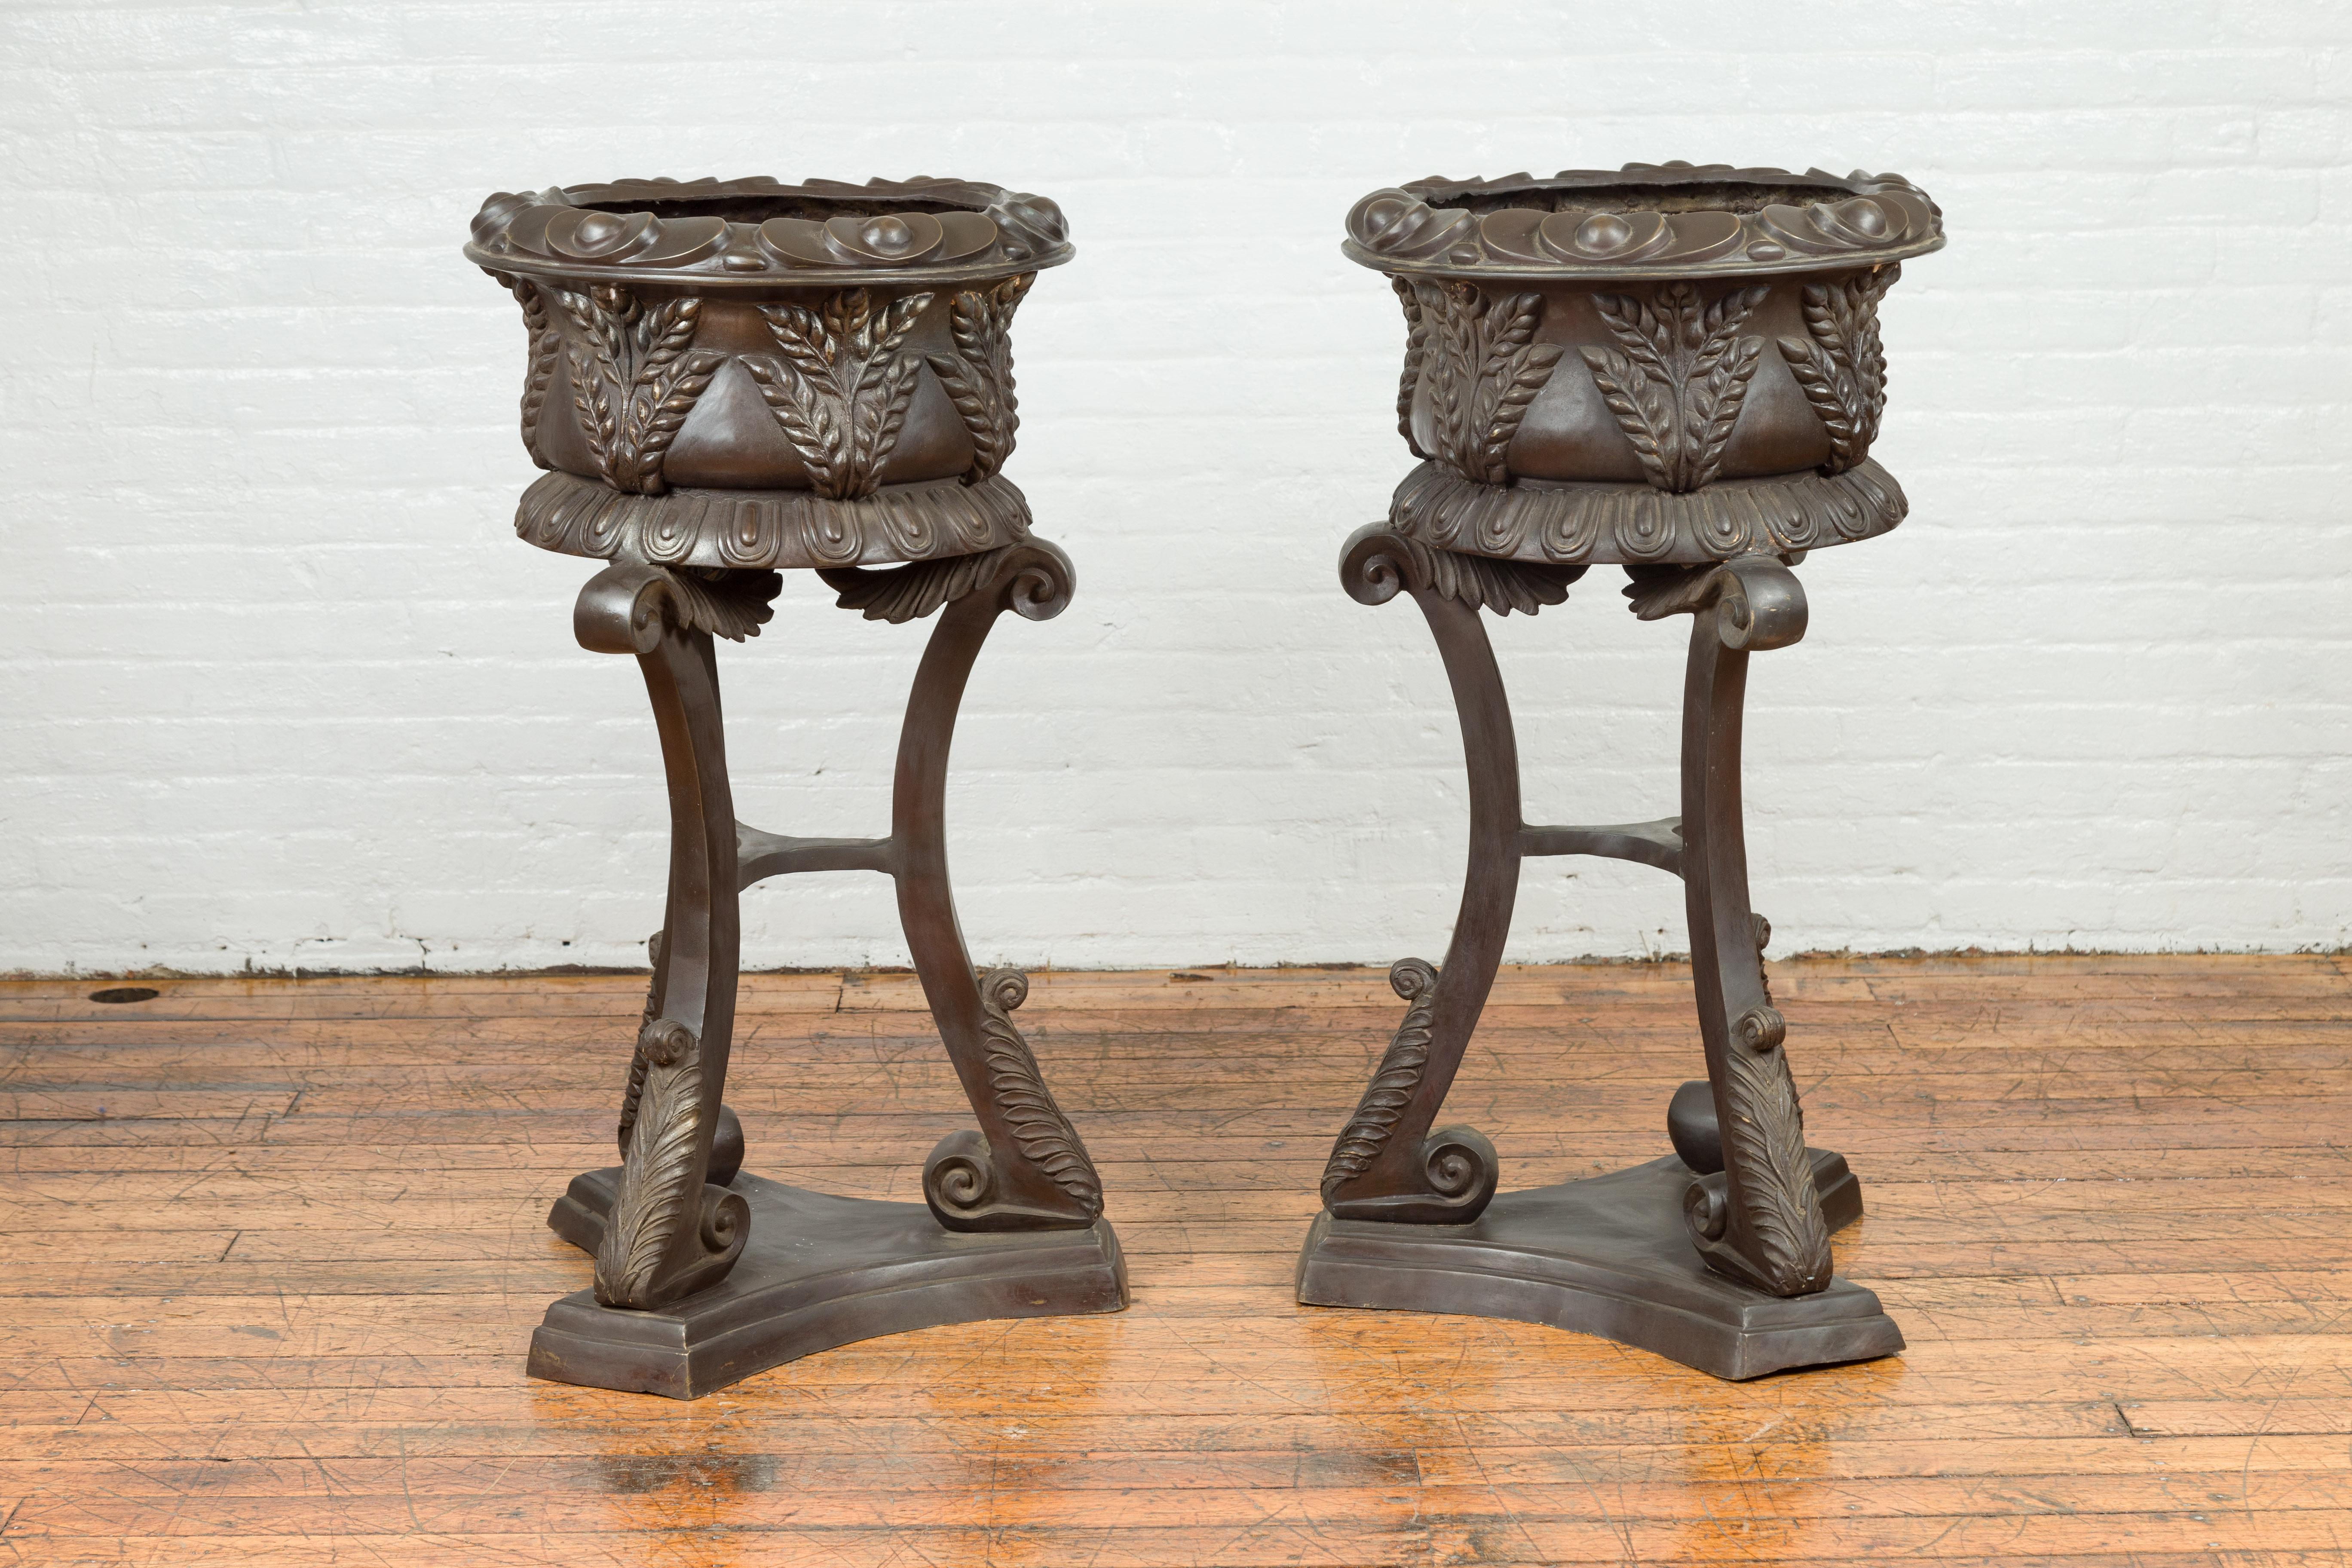 Tall Vintage Bronze European Style Tripod Planter with Raised Floral Motifs For Sale 7